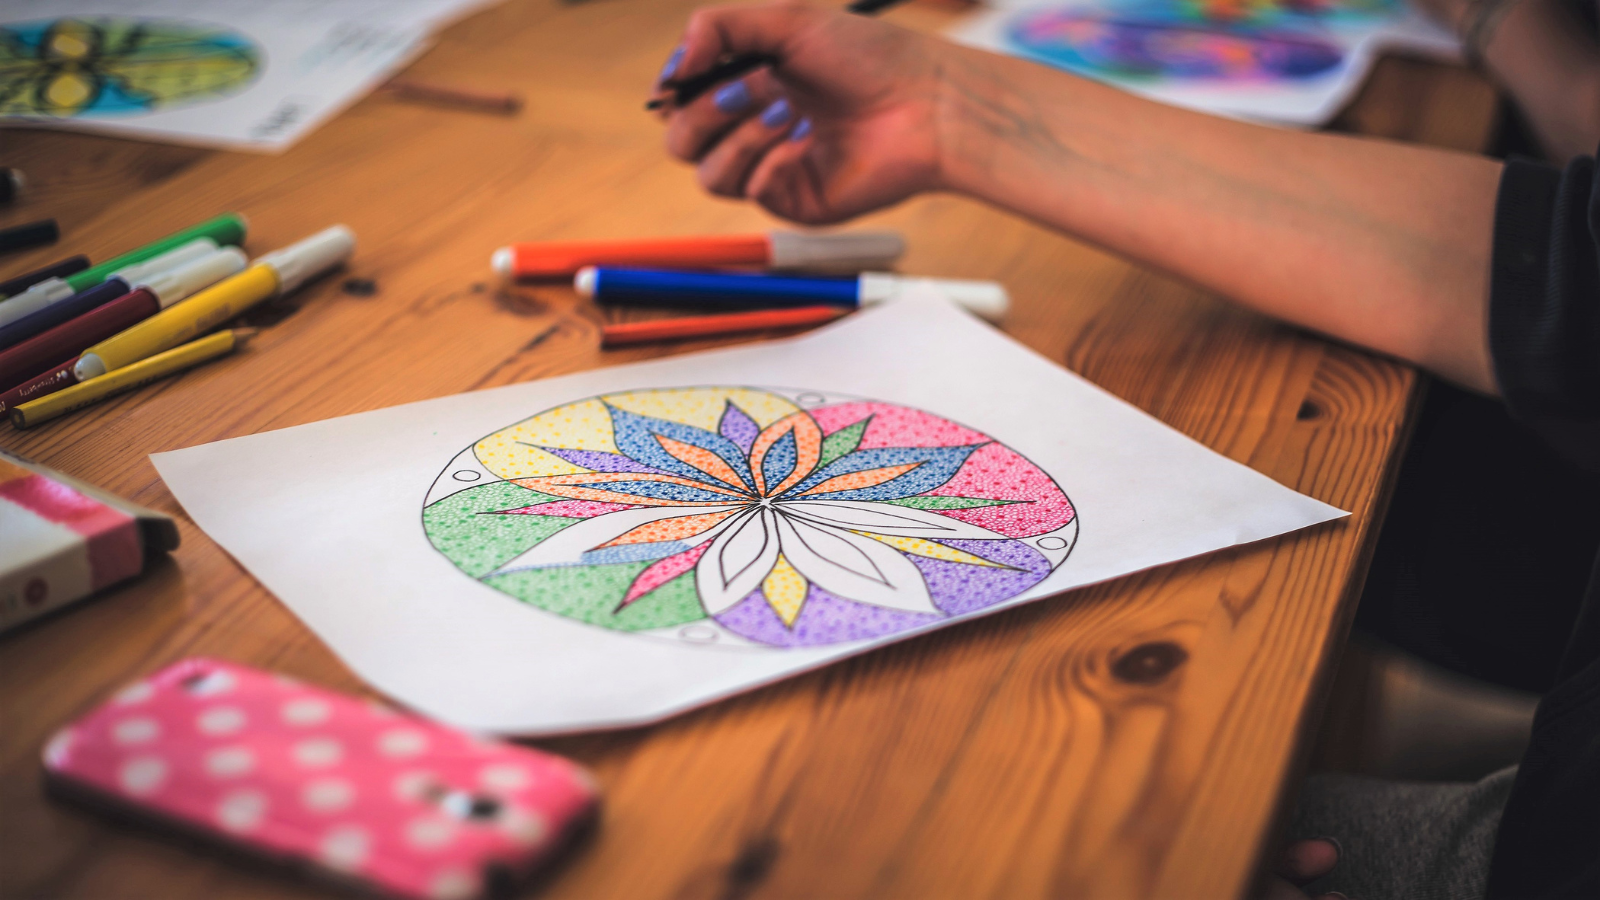 Steps to Find Your Coloring Style: